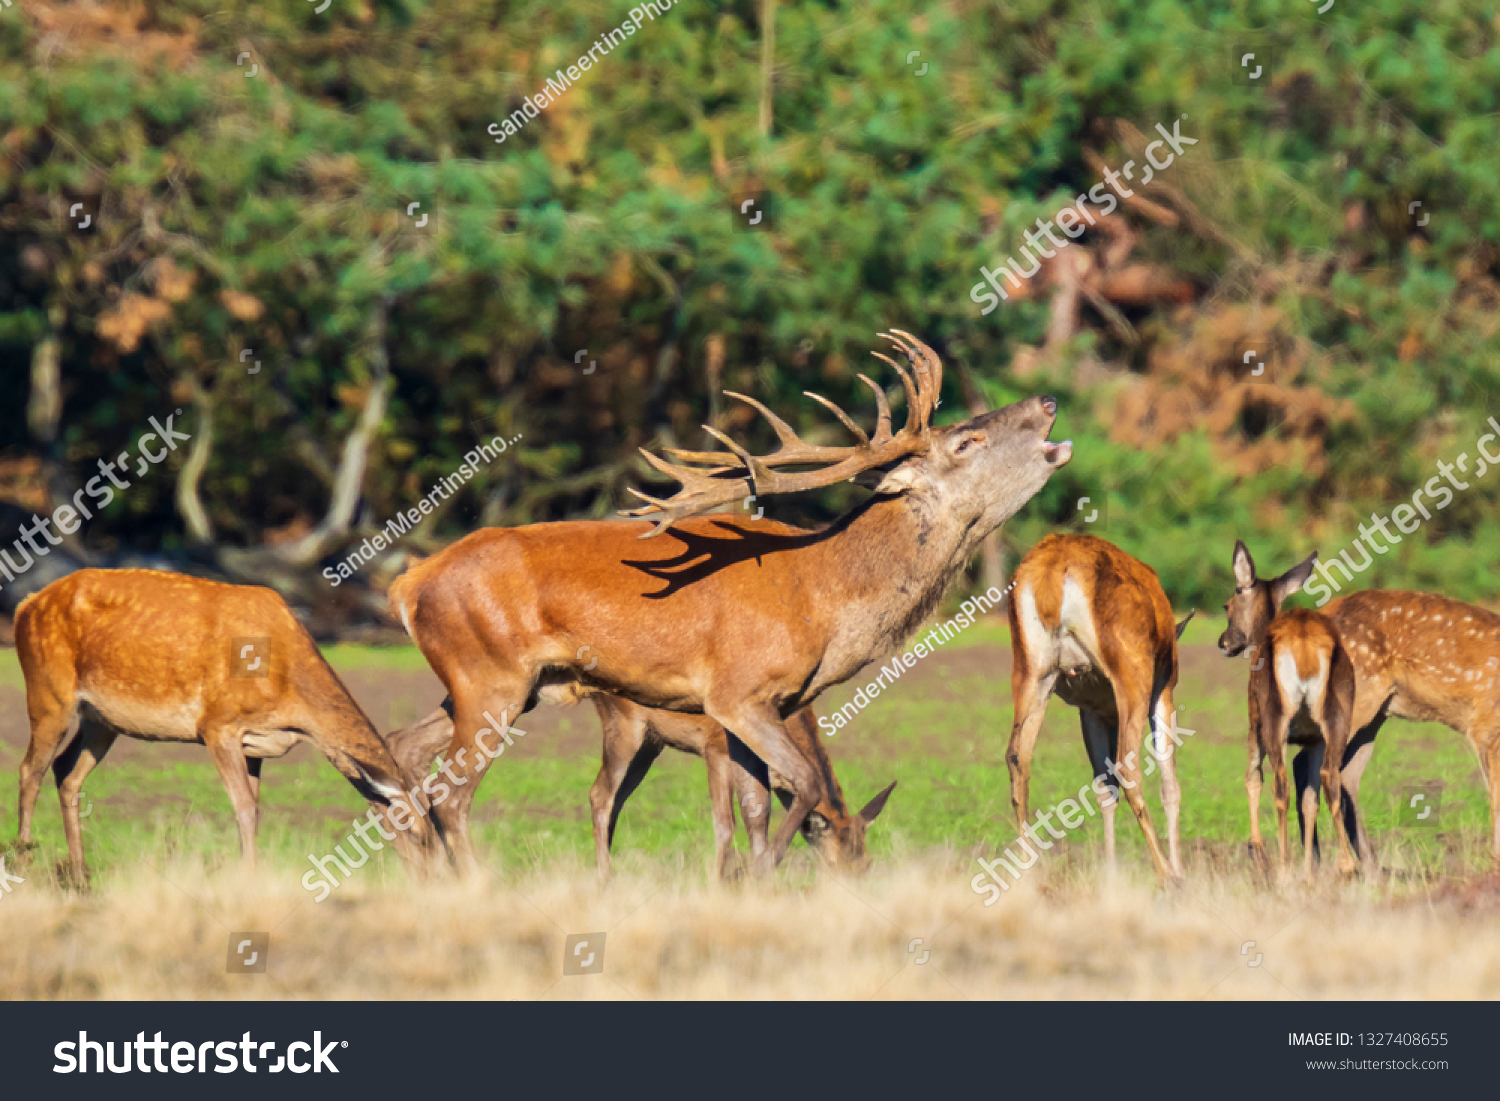 Red deer male, cervus elaphus, rutting during mating season on a field near a forest in purple heather blooming. 
National parc de Hoge Veluwe, the Netherlands Europe.  #1327408655